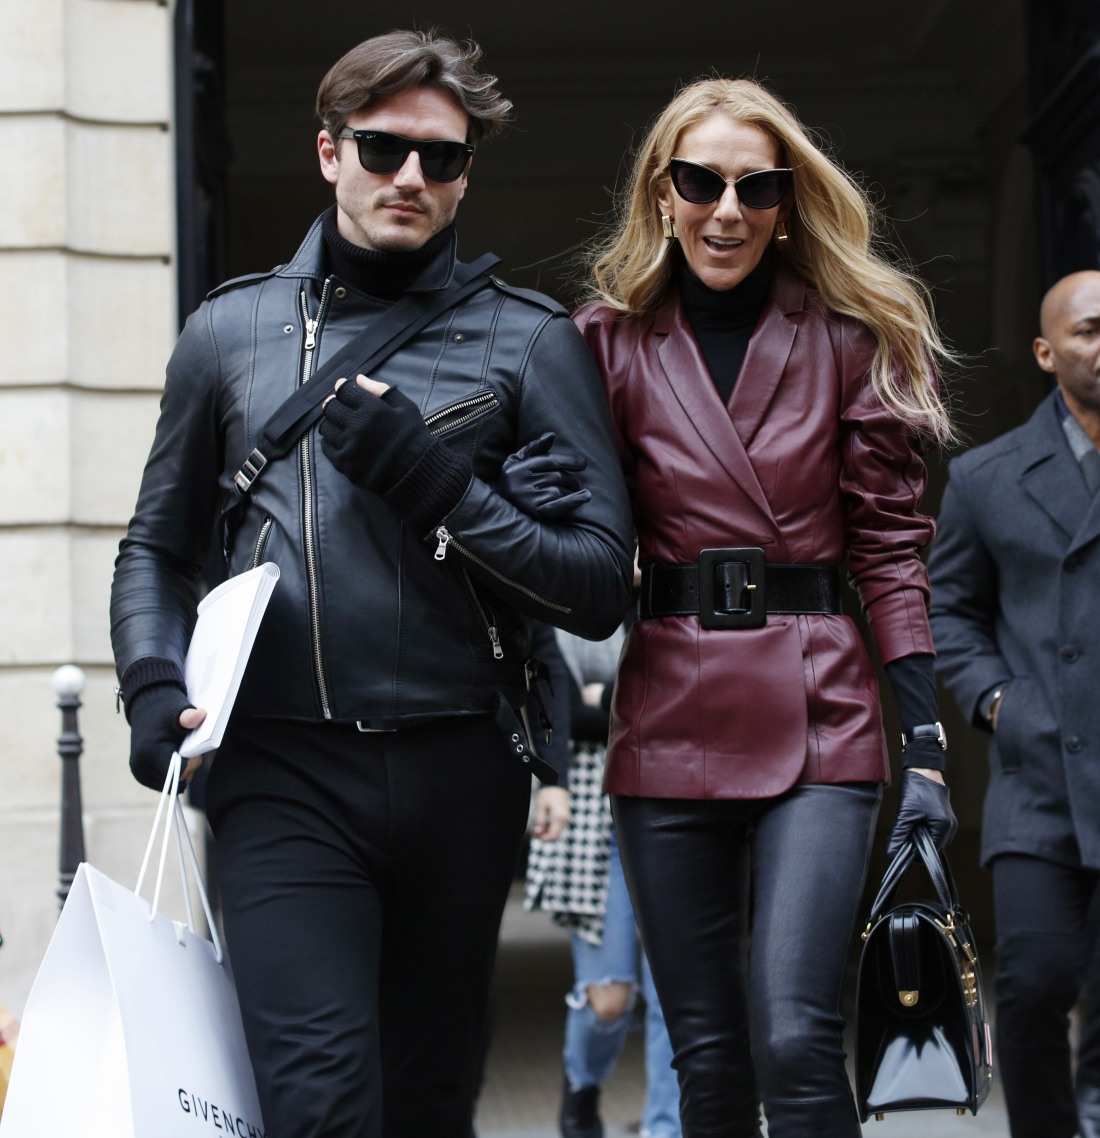 Celine Dion and Pepe Munoz leaving the Givenchy office